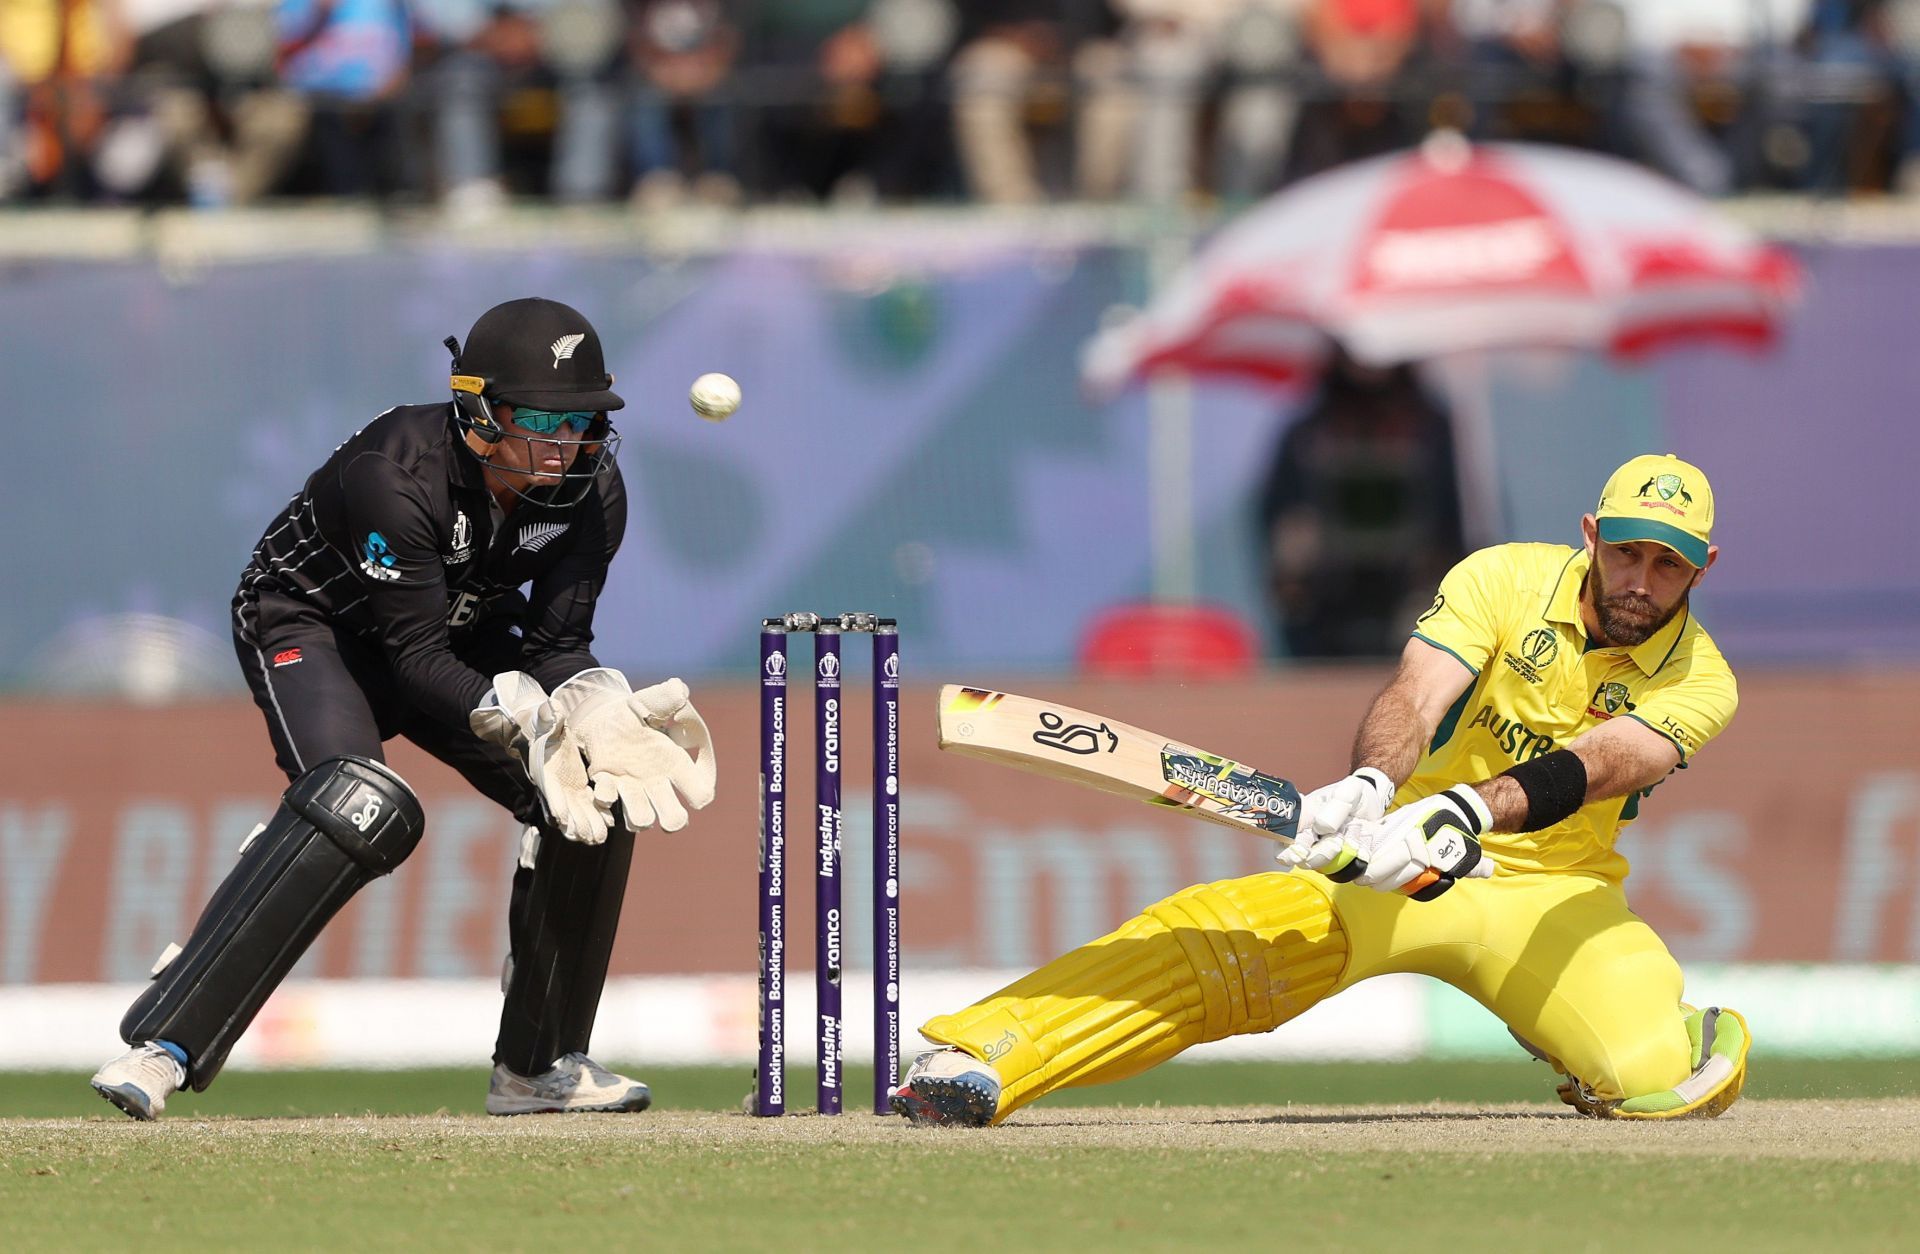 Glenn Maxwell while playing an outrageous shot vs NZ [Getty Images]